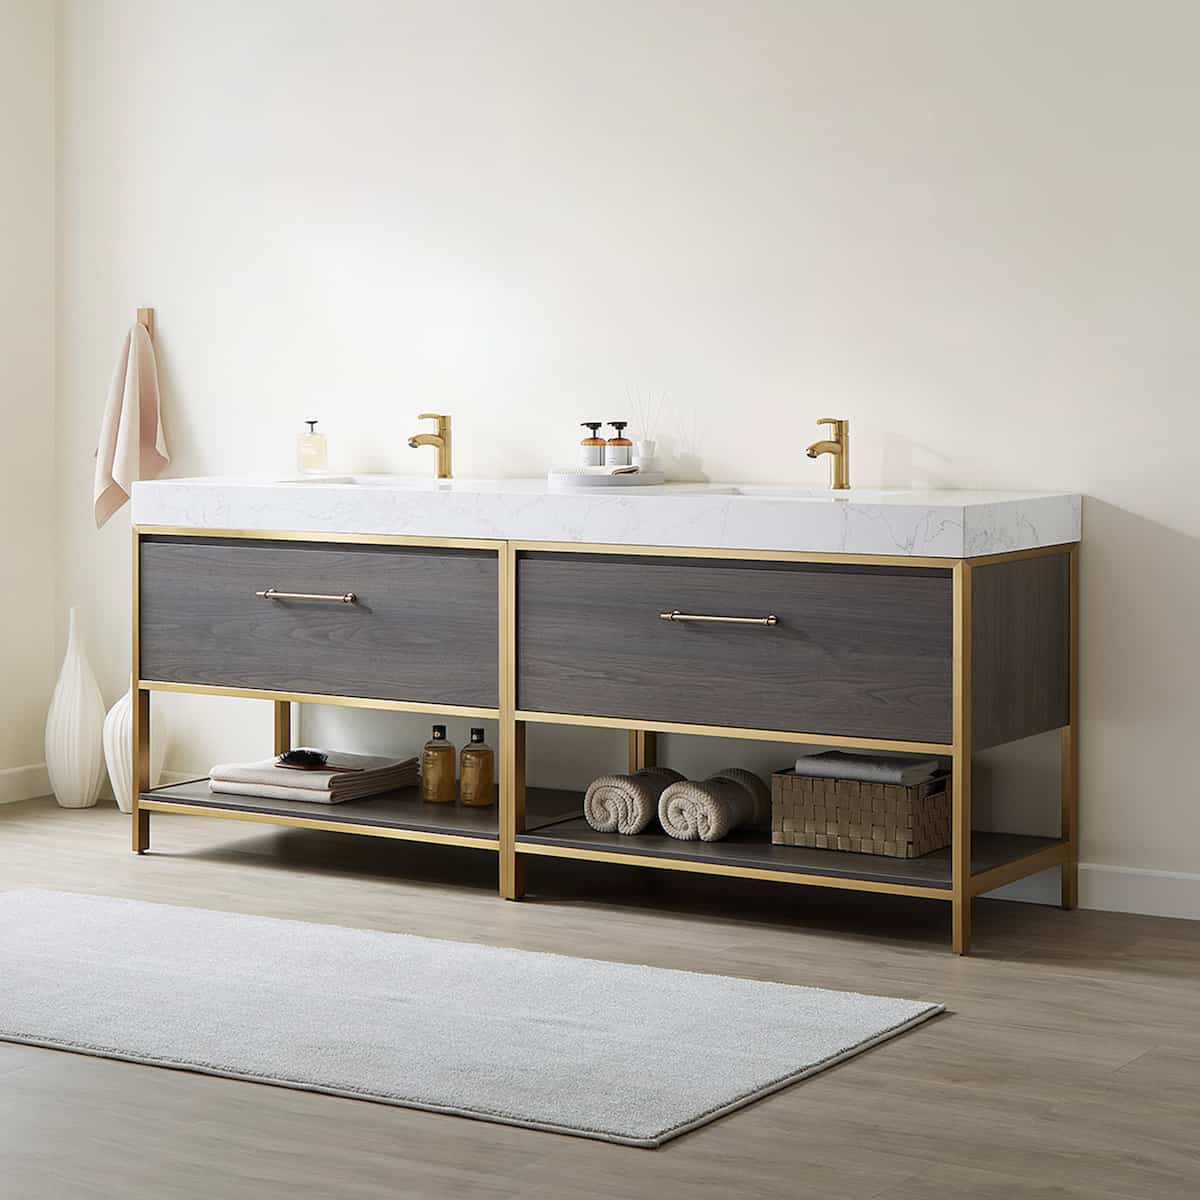 Vinnova Palma 84 Inch Freestanding Double Sink Bath Vanity in Suleiman Oak with White Composite Grain Stone Without Mirror Side 701284G-SO-GW-NM